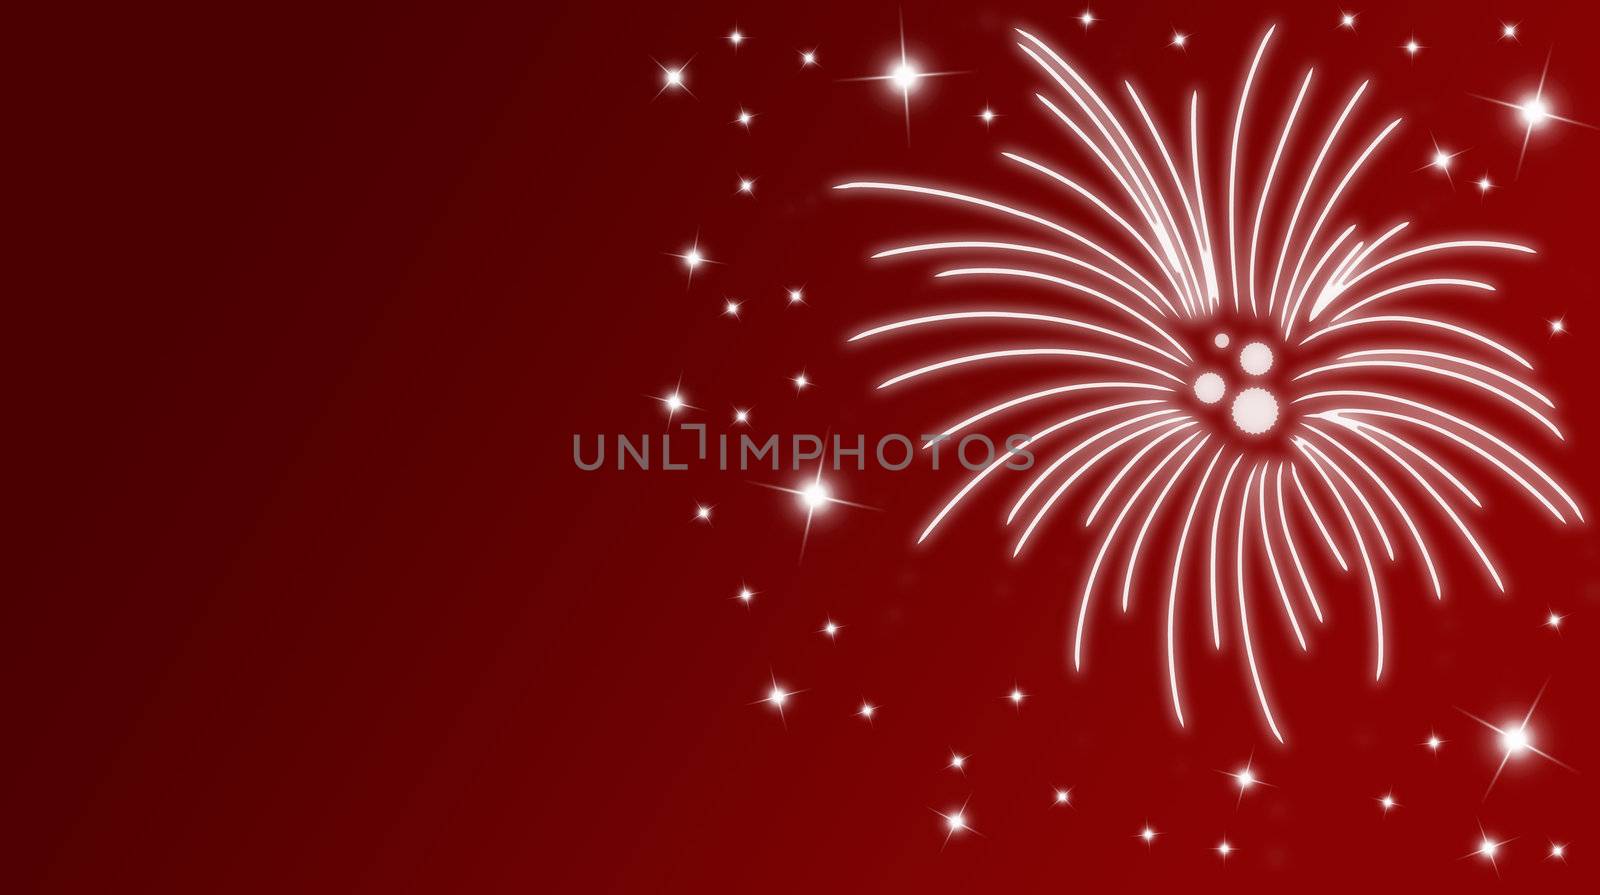 Silvestercard with fireworks and stars in red